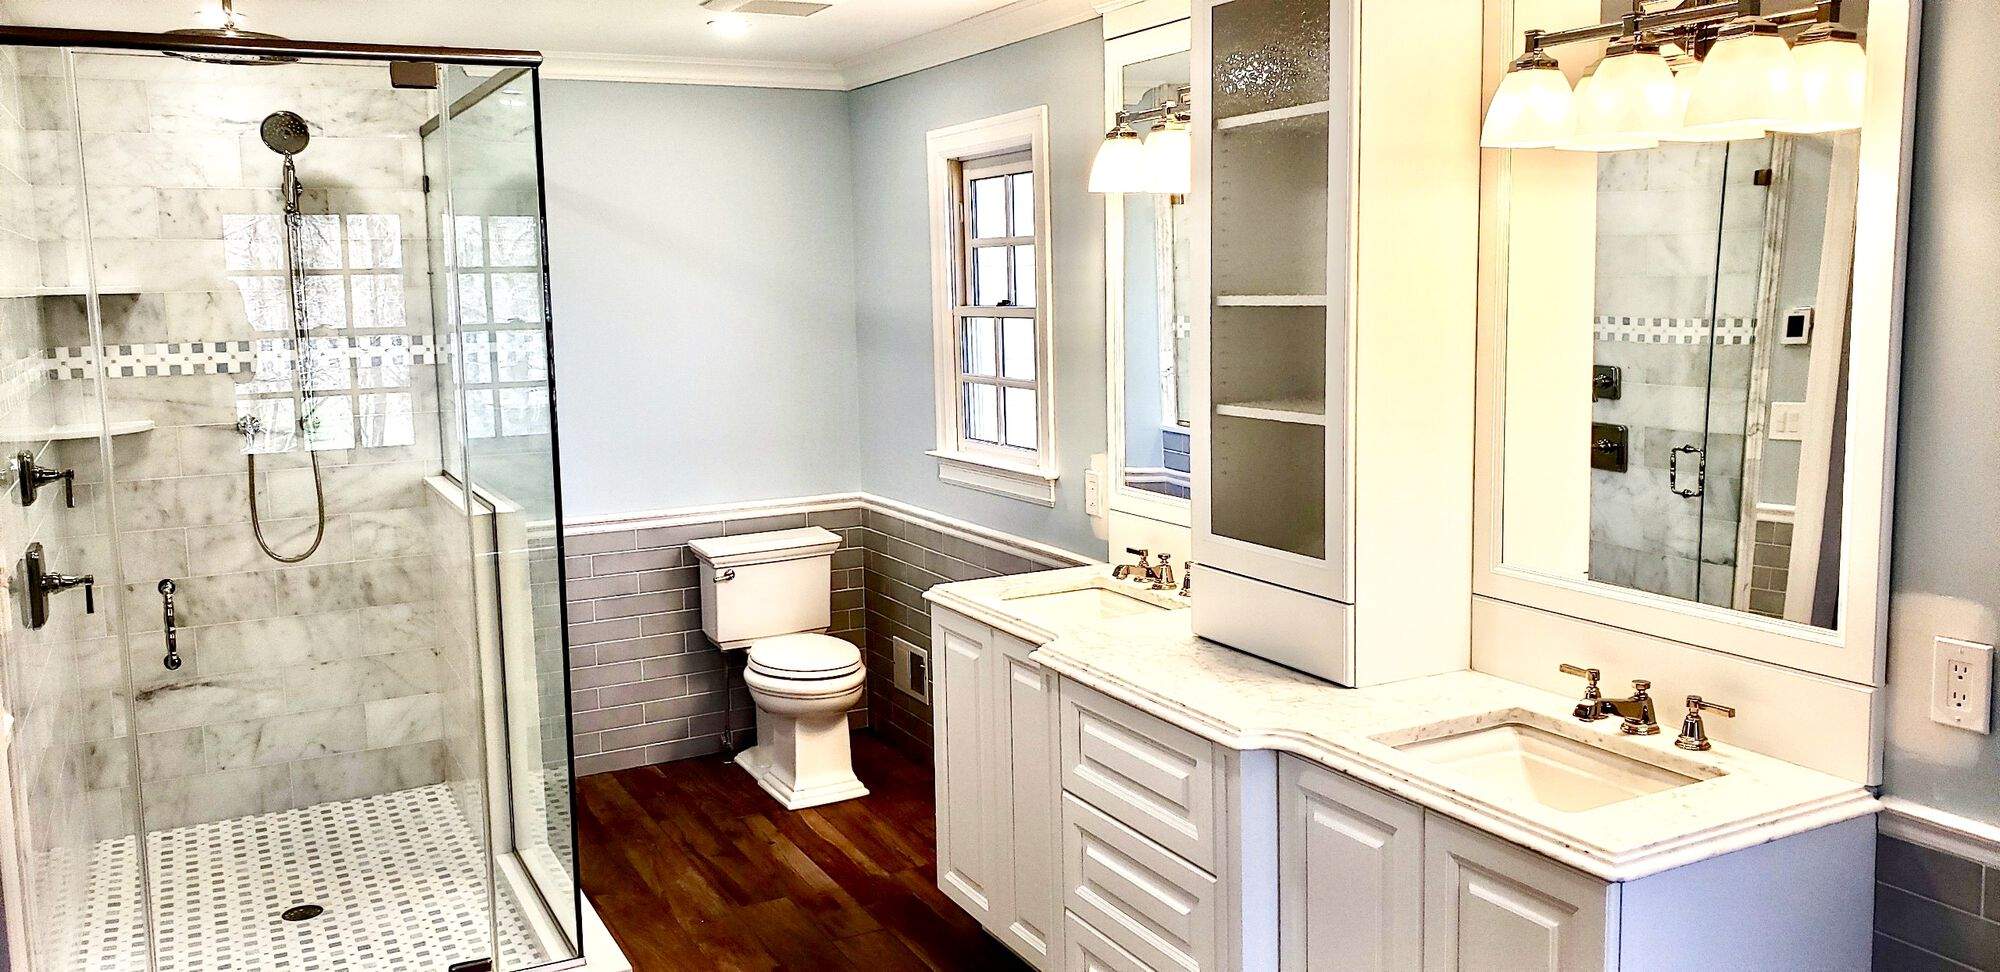 How much does it cost to remodel a bathroom? PW Painters & Remodeling